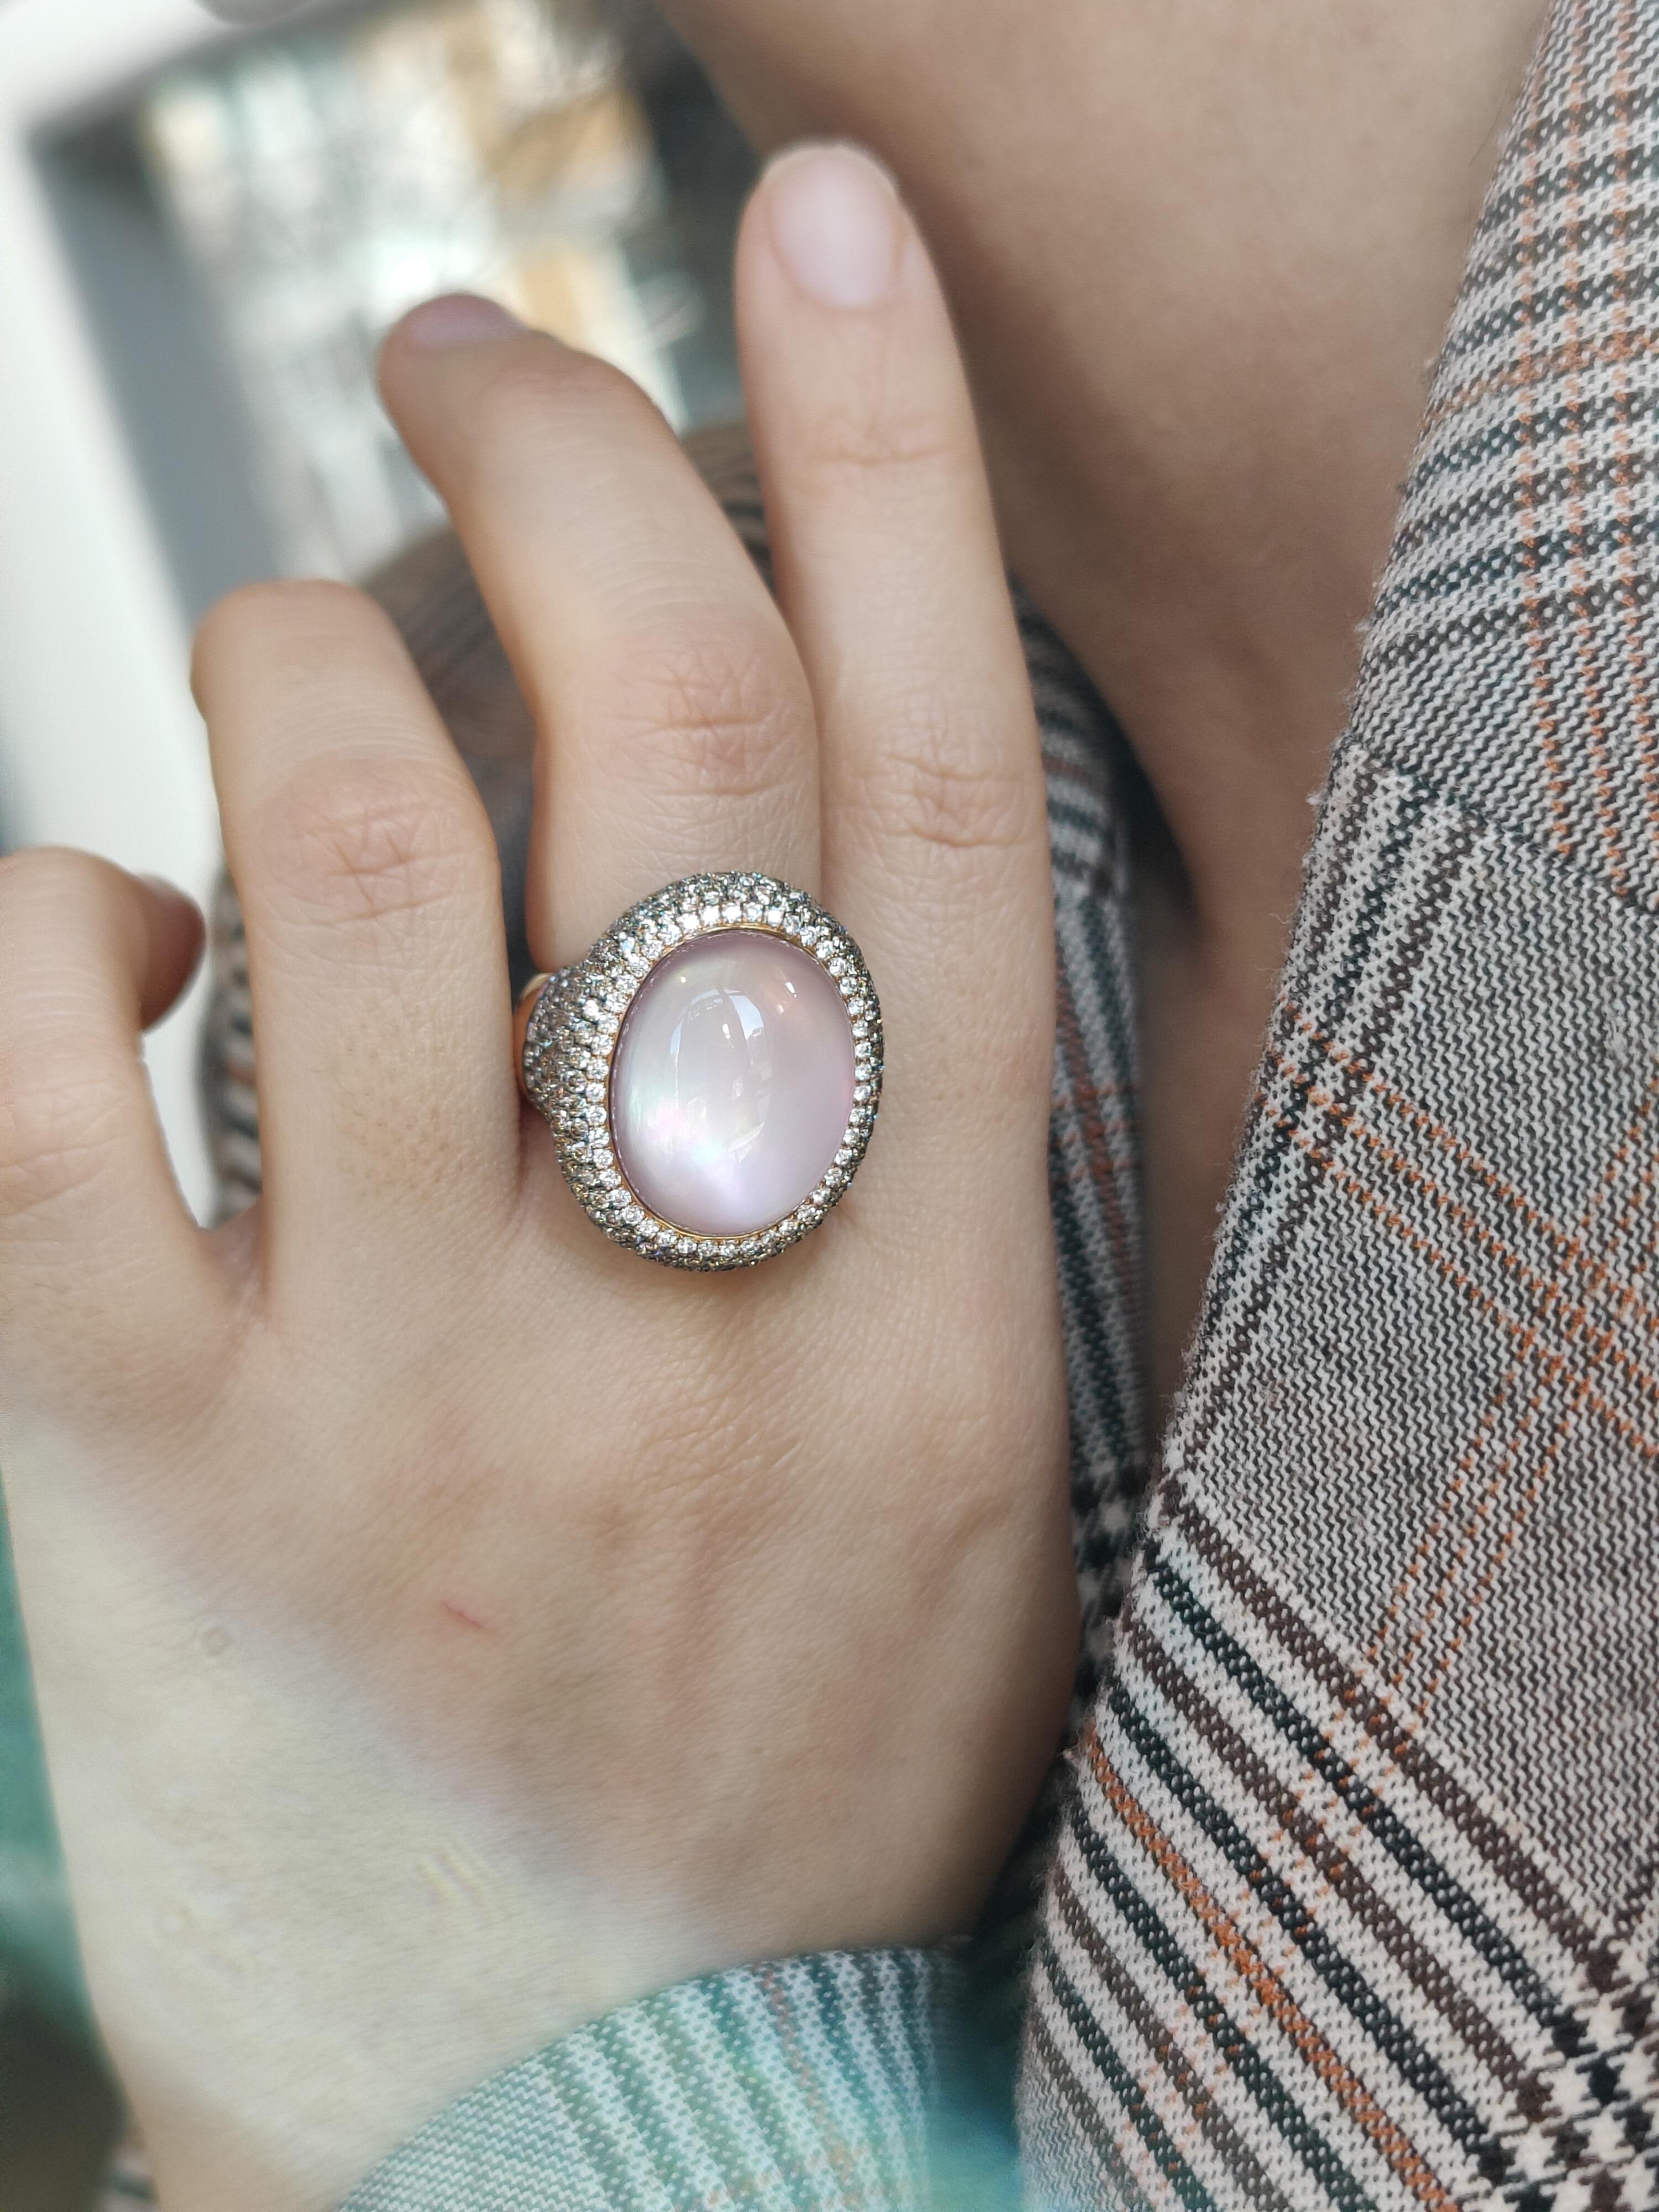 The  beautiful soft pink colour of the cabochon oval cut rose quartz is accentuated by 0.32 carat white pavé diamonds encircling the rose quartz and are set in an 18 karat rose gold setting.

Around this sparkling line of diamonds a total of 3.45